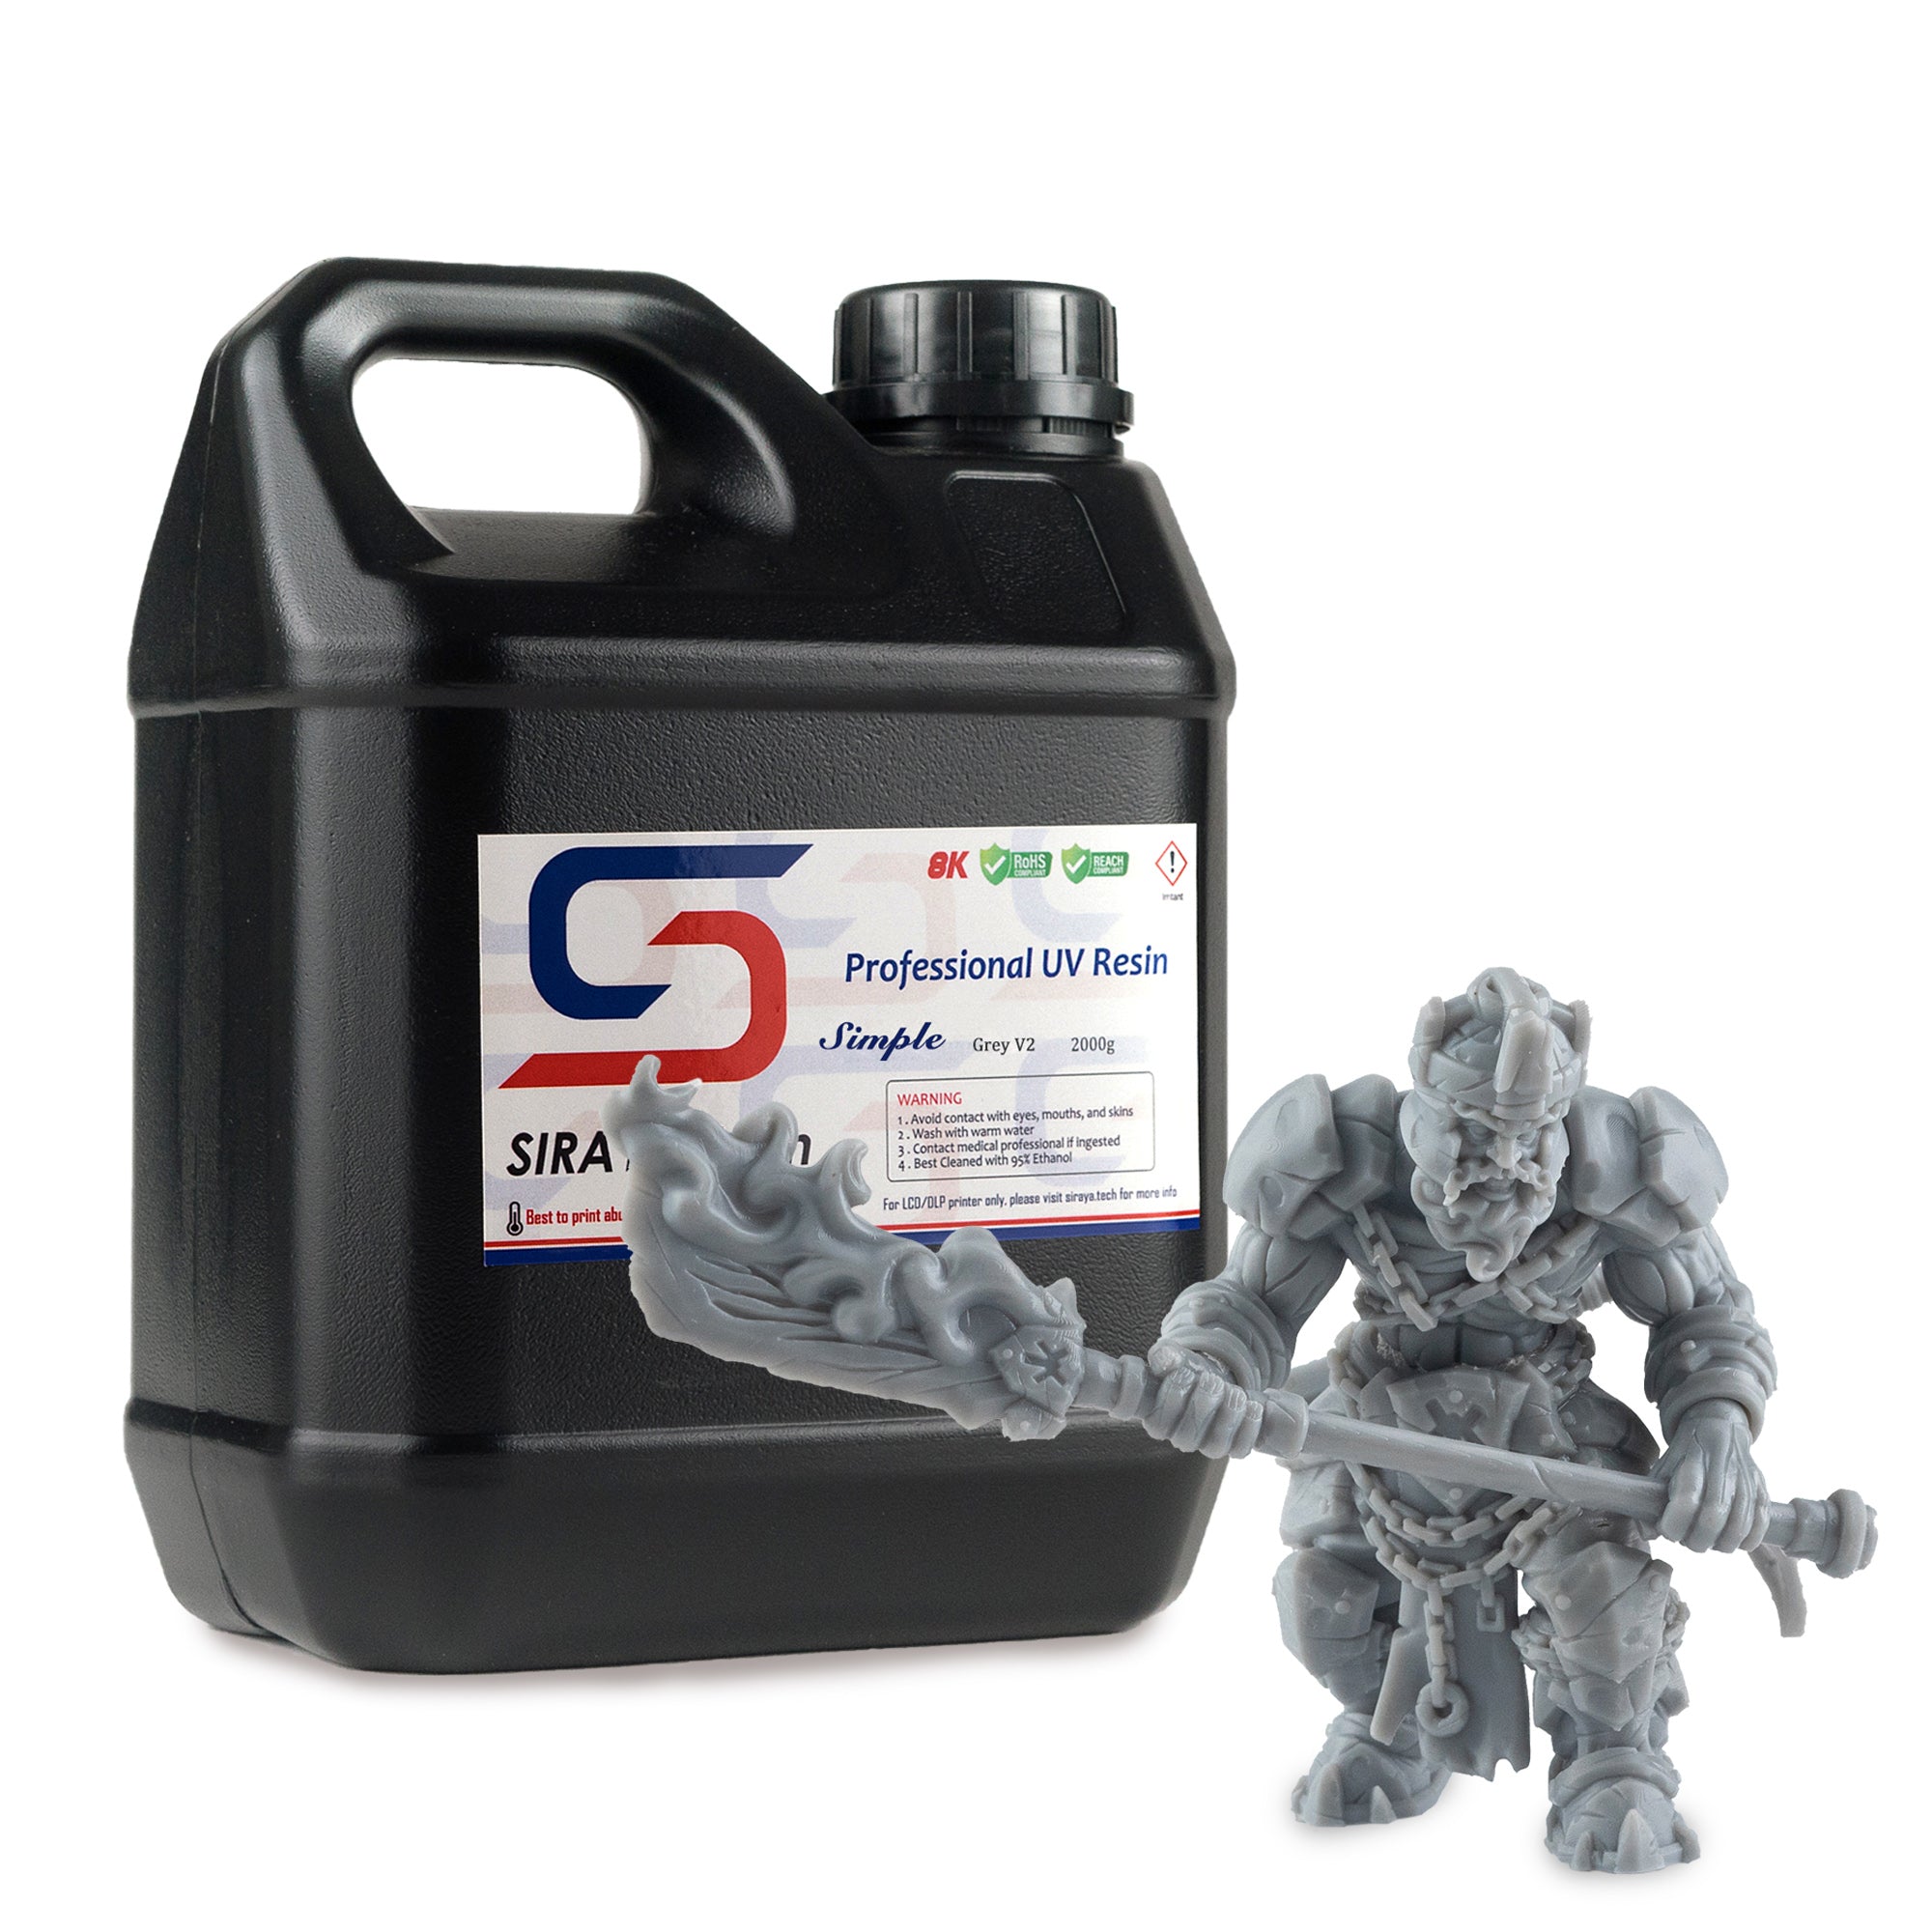 Water washable Resin - Simple Grey V2 (2kg for US)